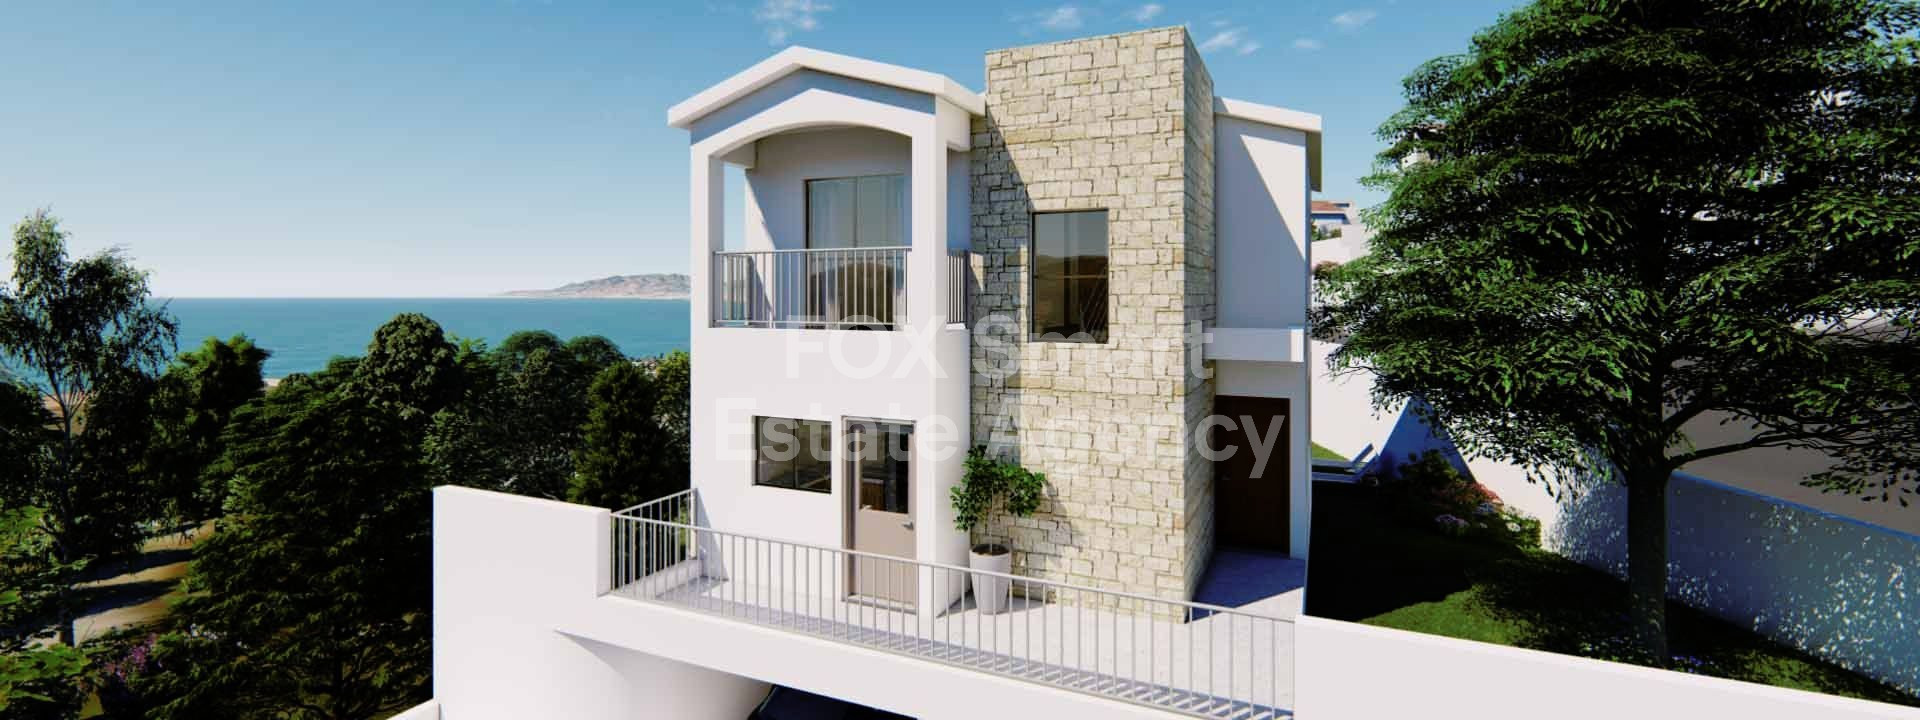 House, For Sale, Paphos, Neo Chorio  3 Bedrooms 2 Bathrooms.....